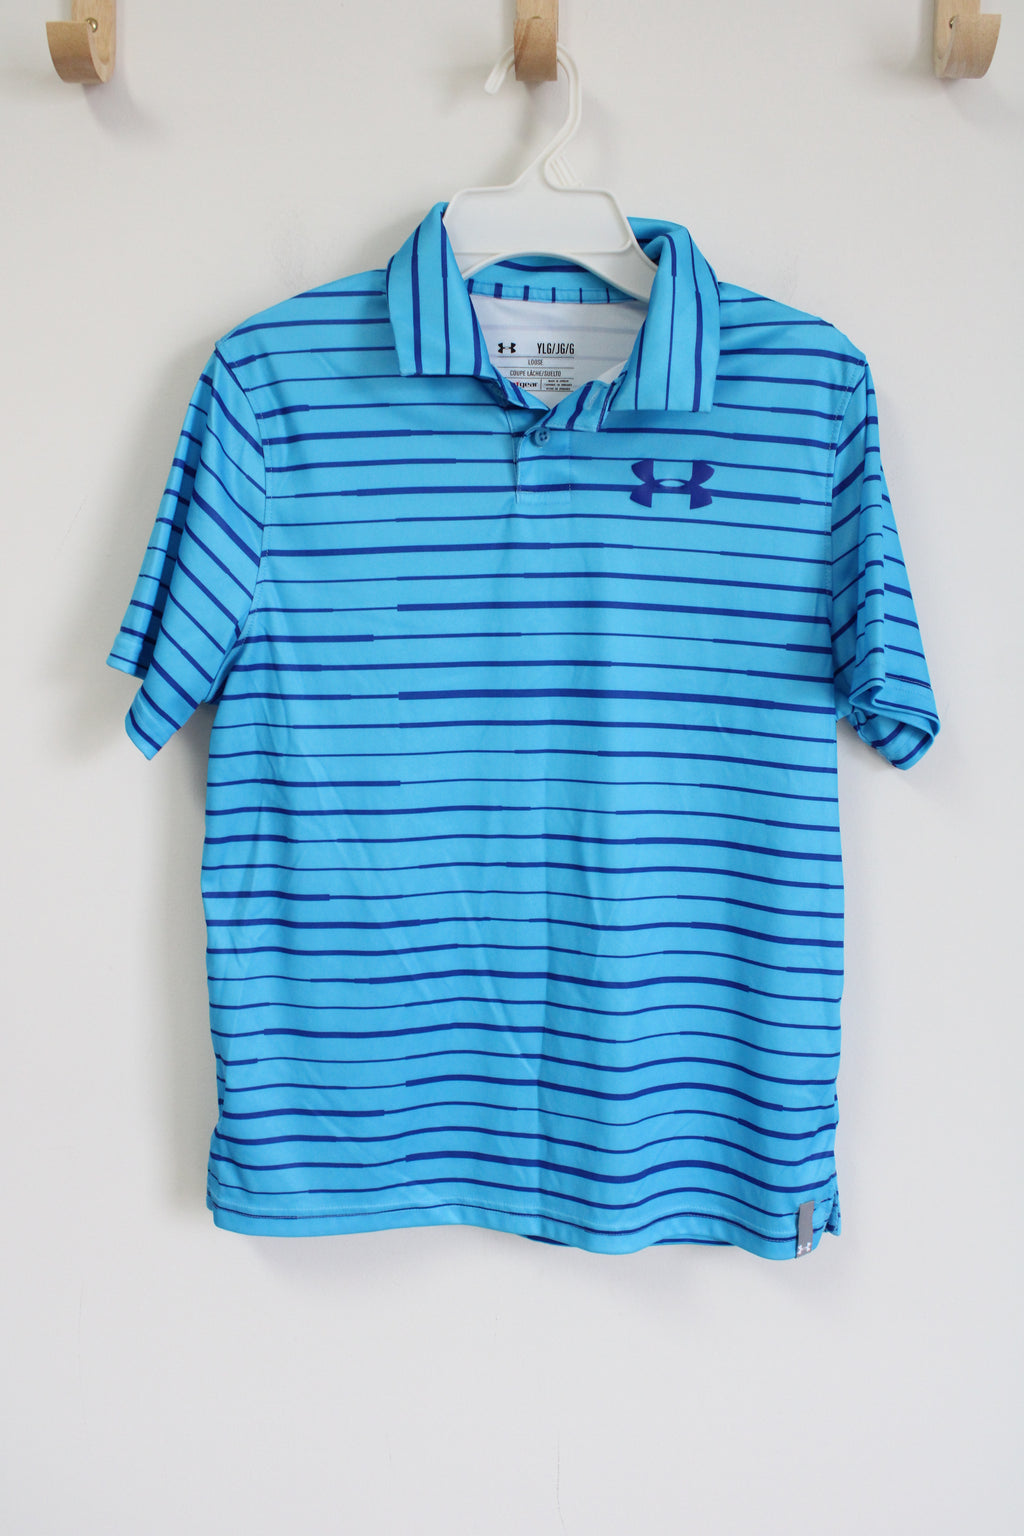 Under Armour Blue Striped Polo Shirt | Youth L (14/16)